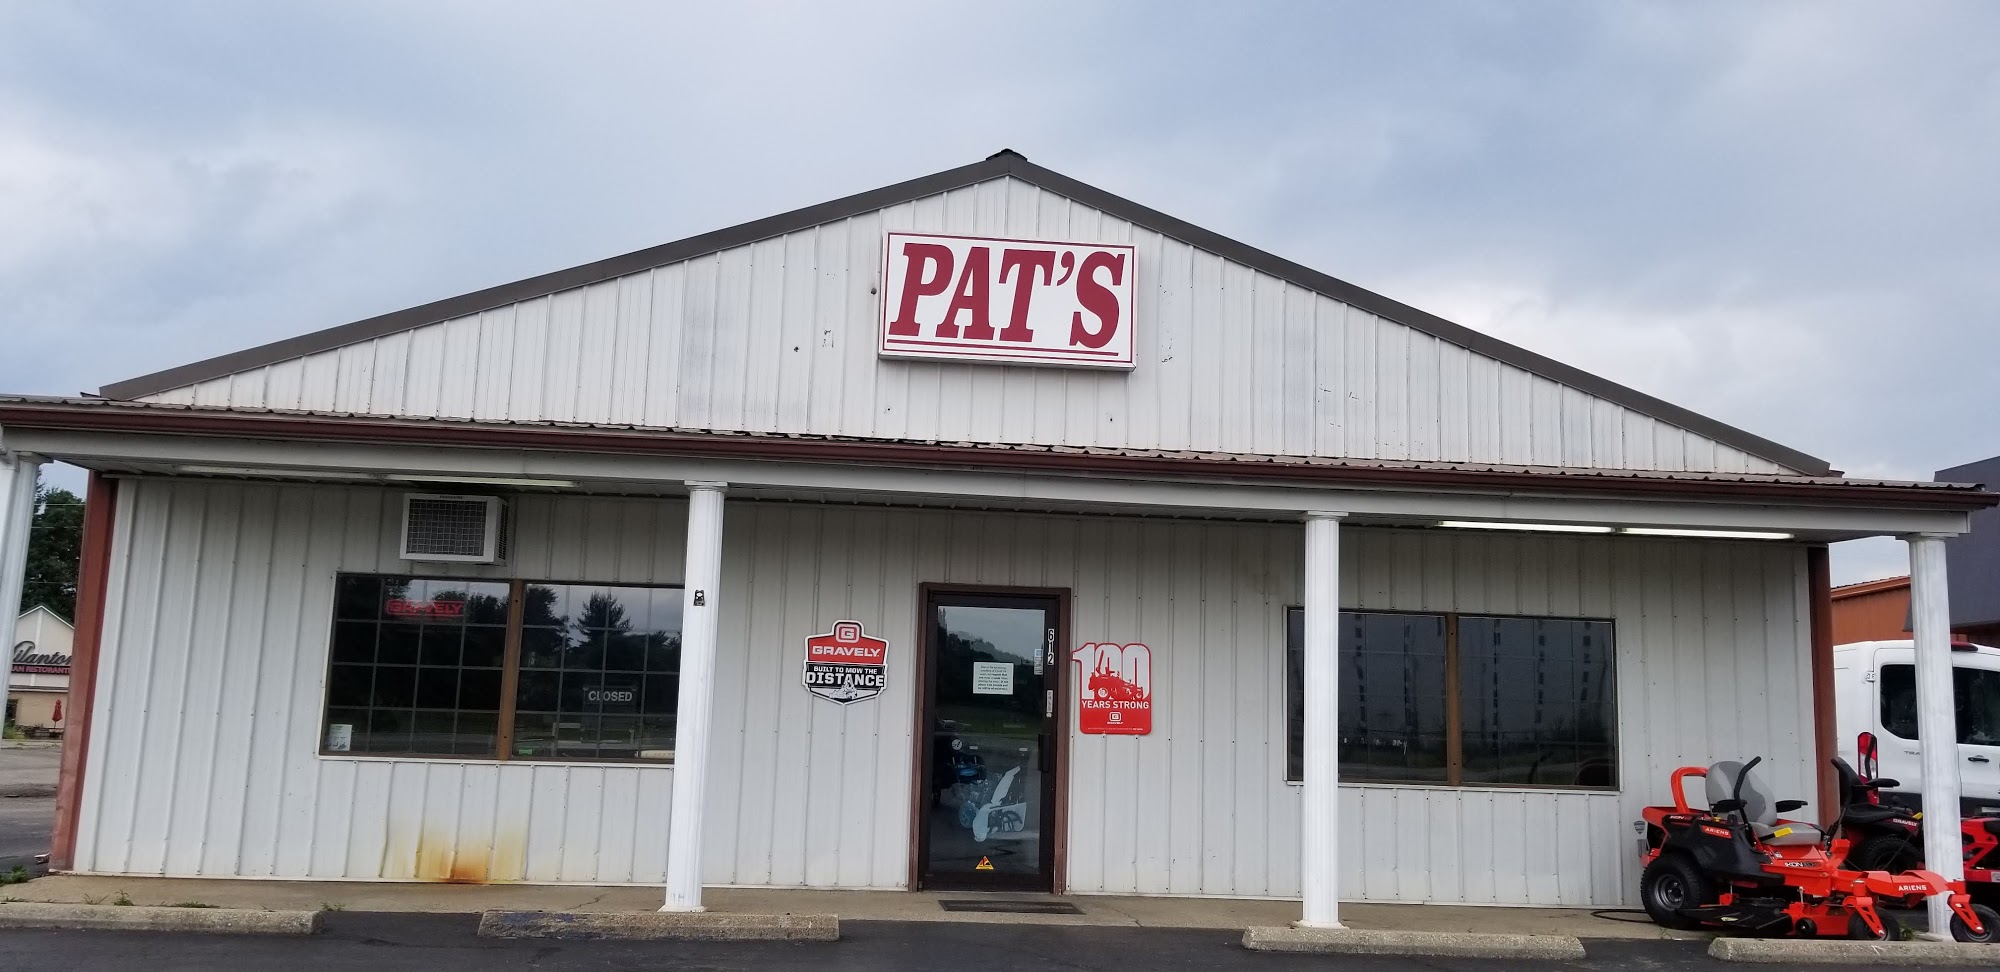 Pat's Appliance and Lawn Care